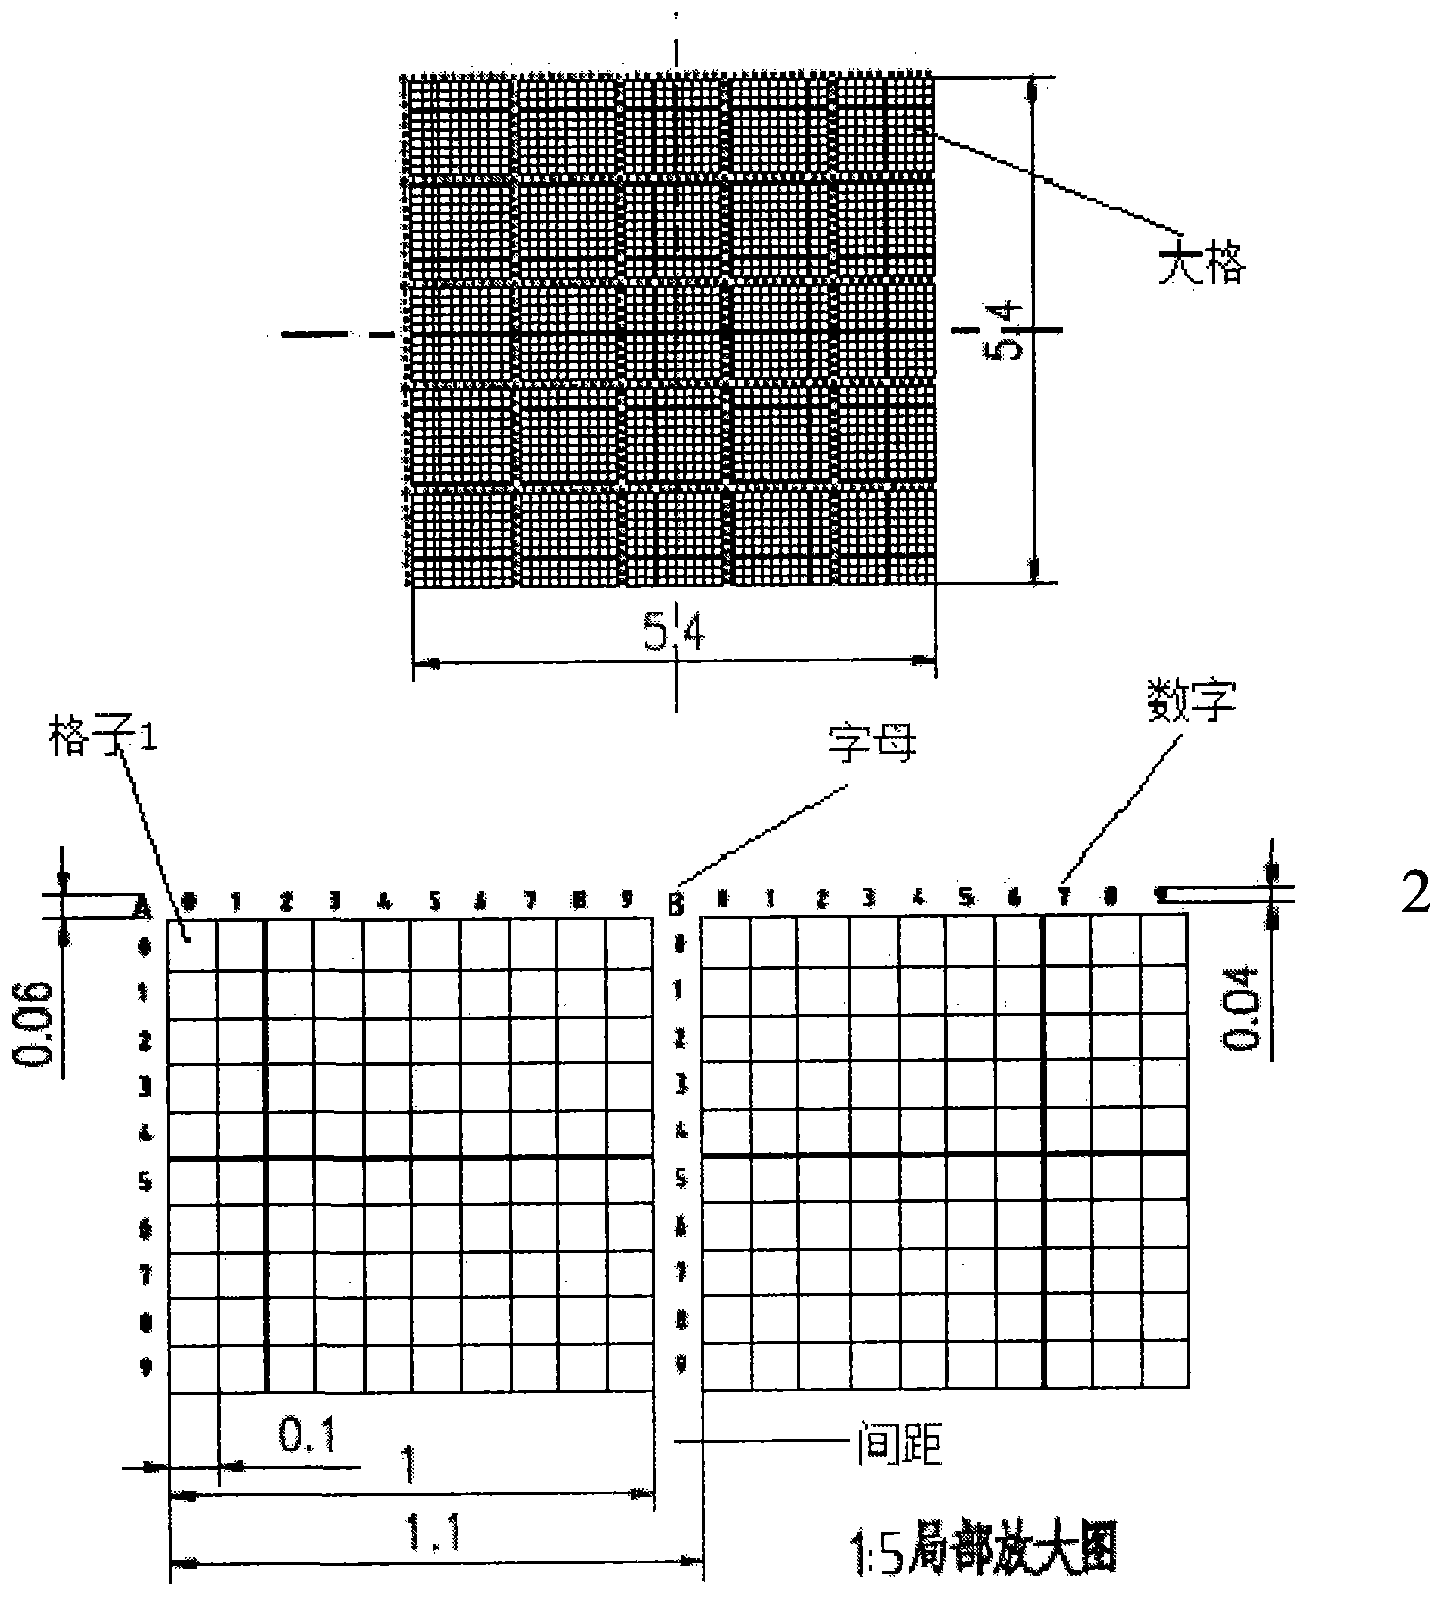 Grid positioning sheet capable of detecting sperms quickly